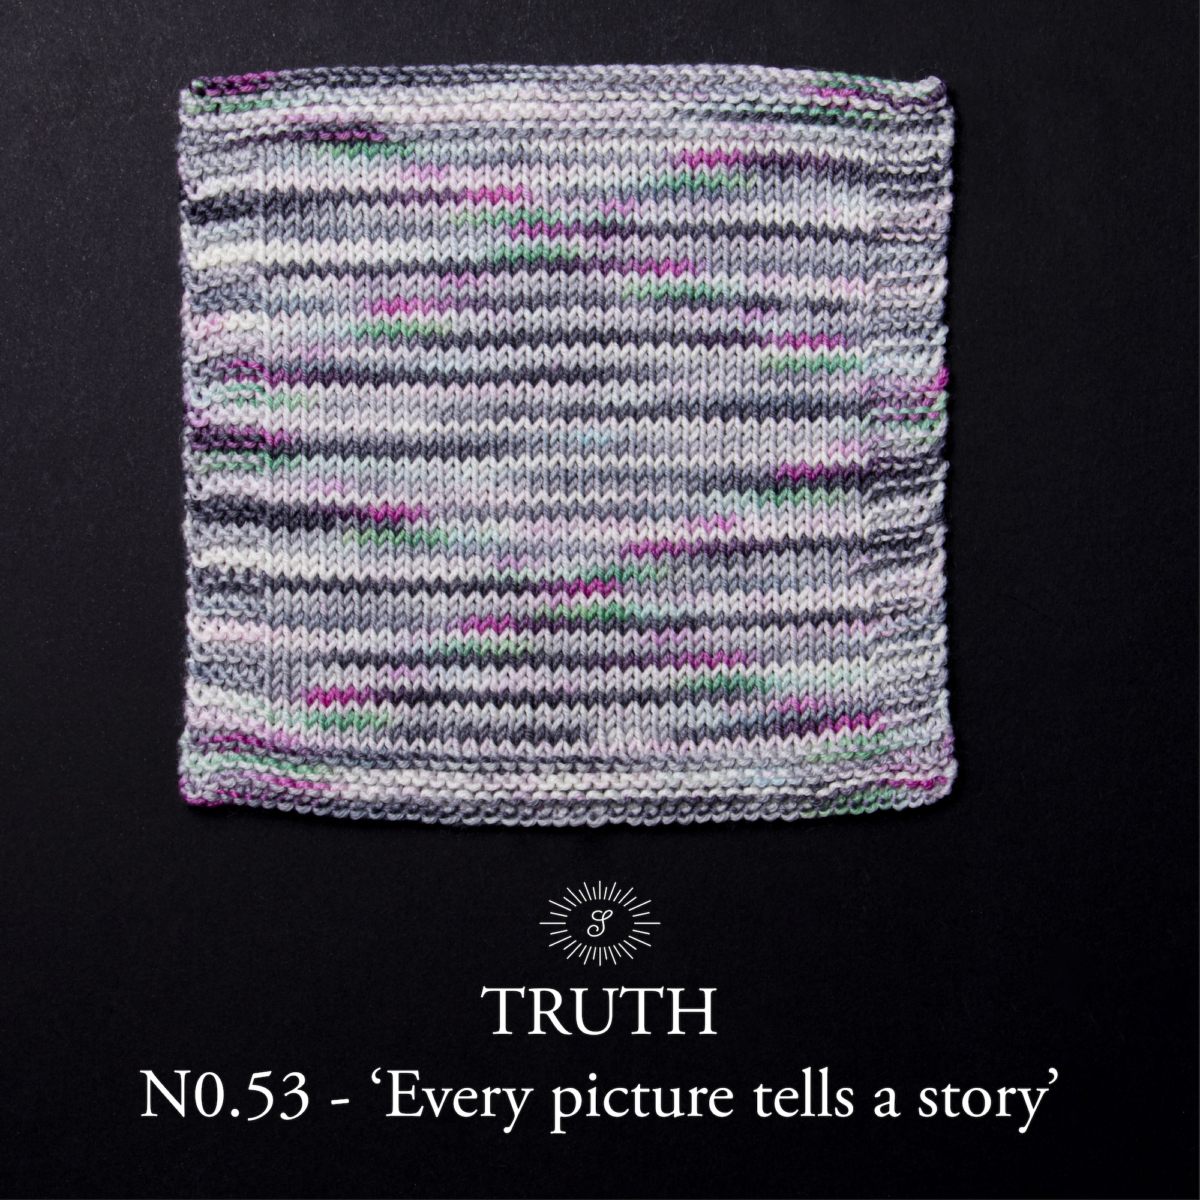 Truth 053 swatch